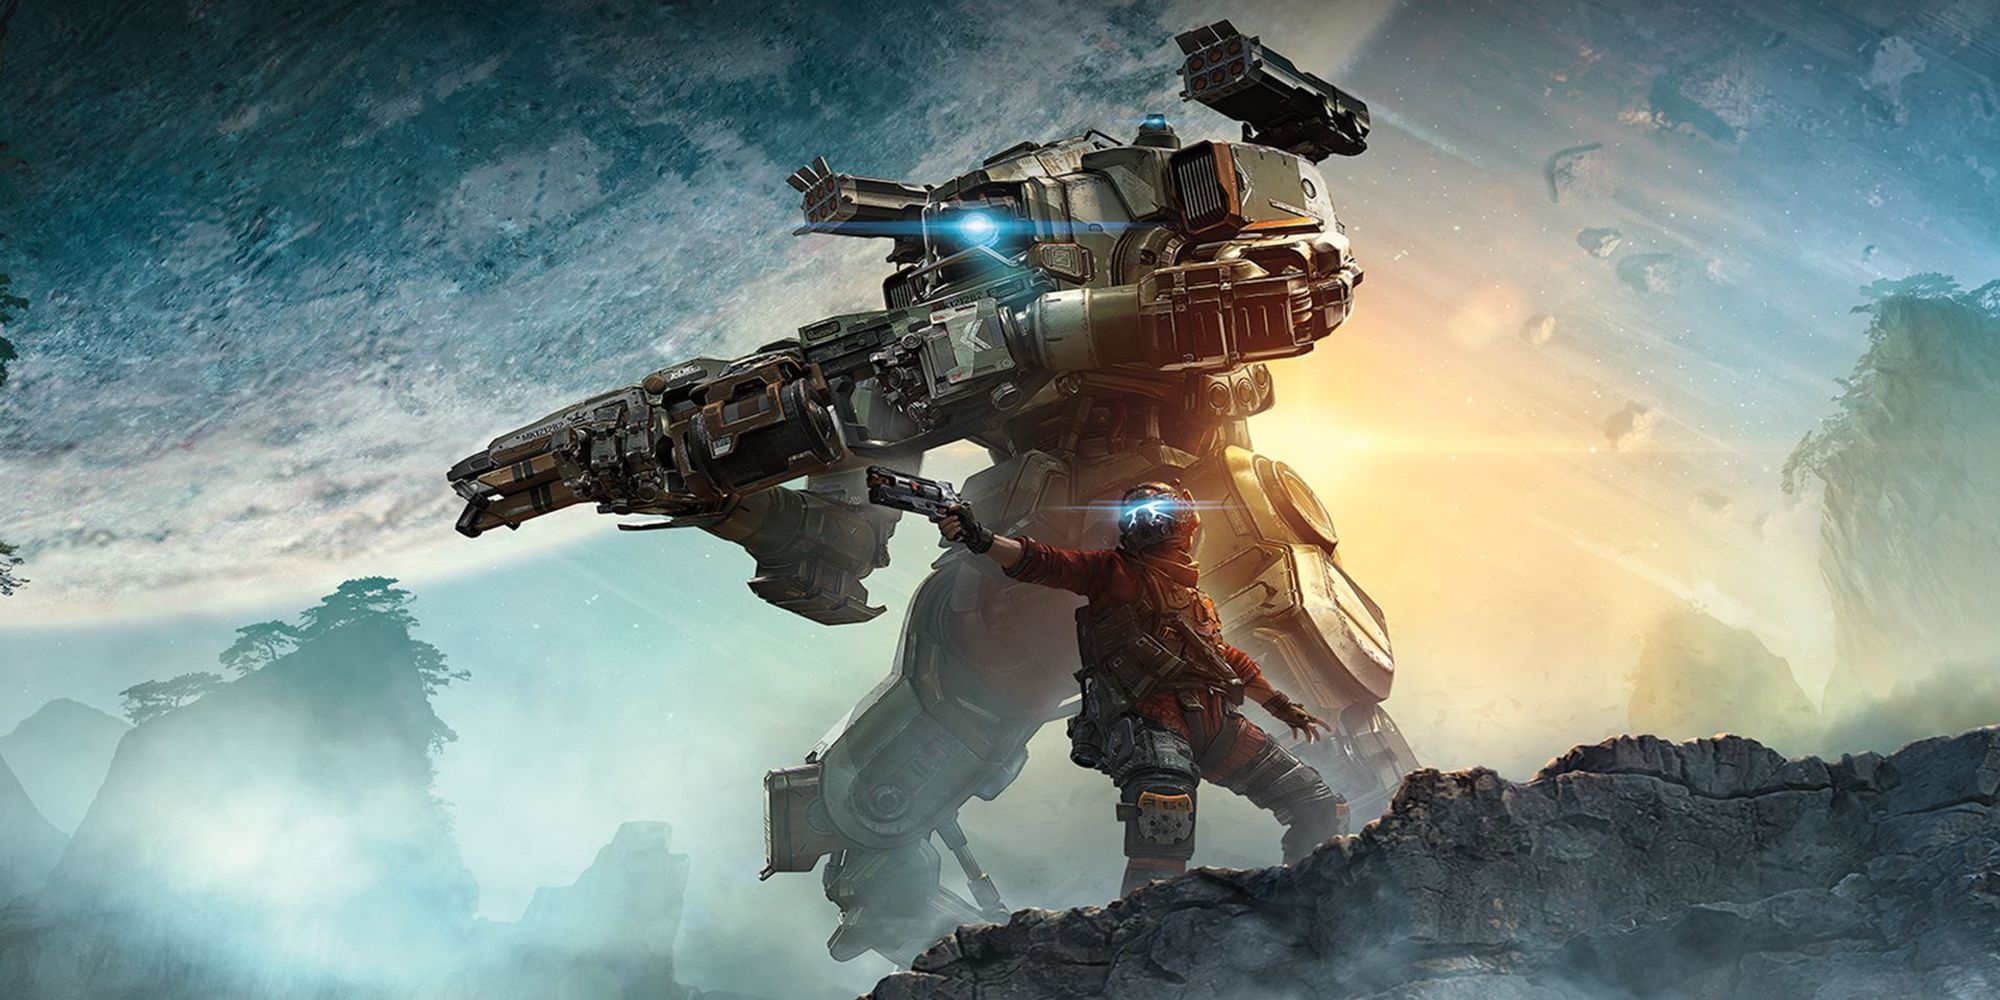 The Northstar Mod is Titanfall 2's Second Lease On Multiplayer Life